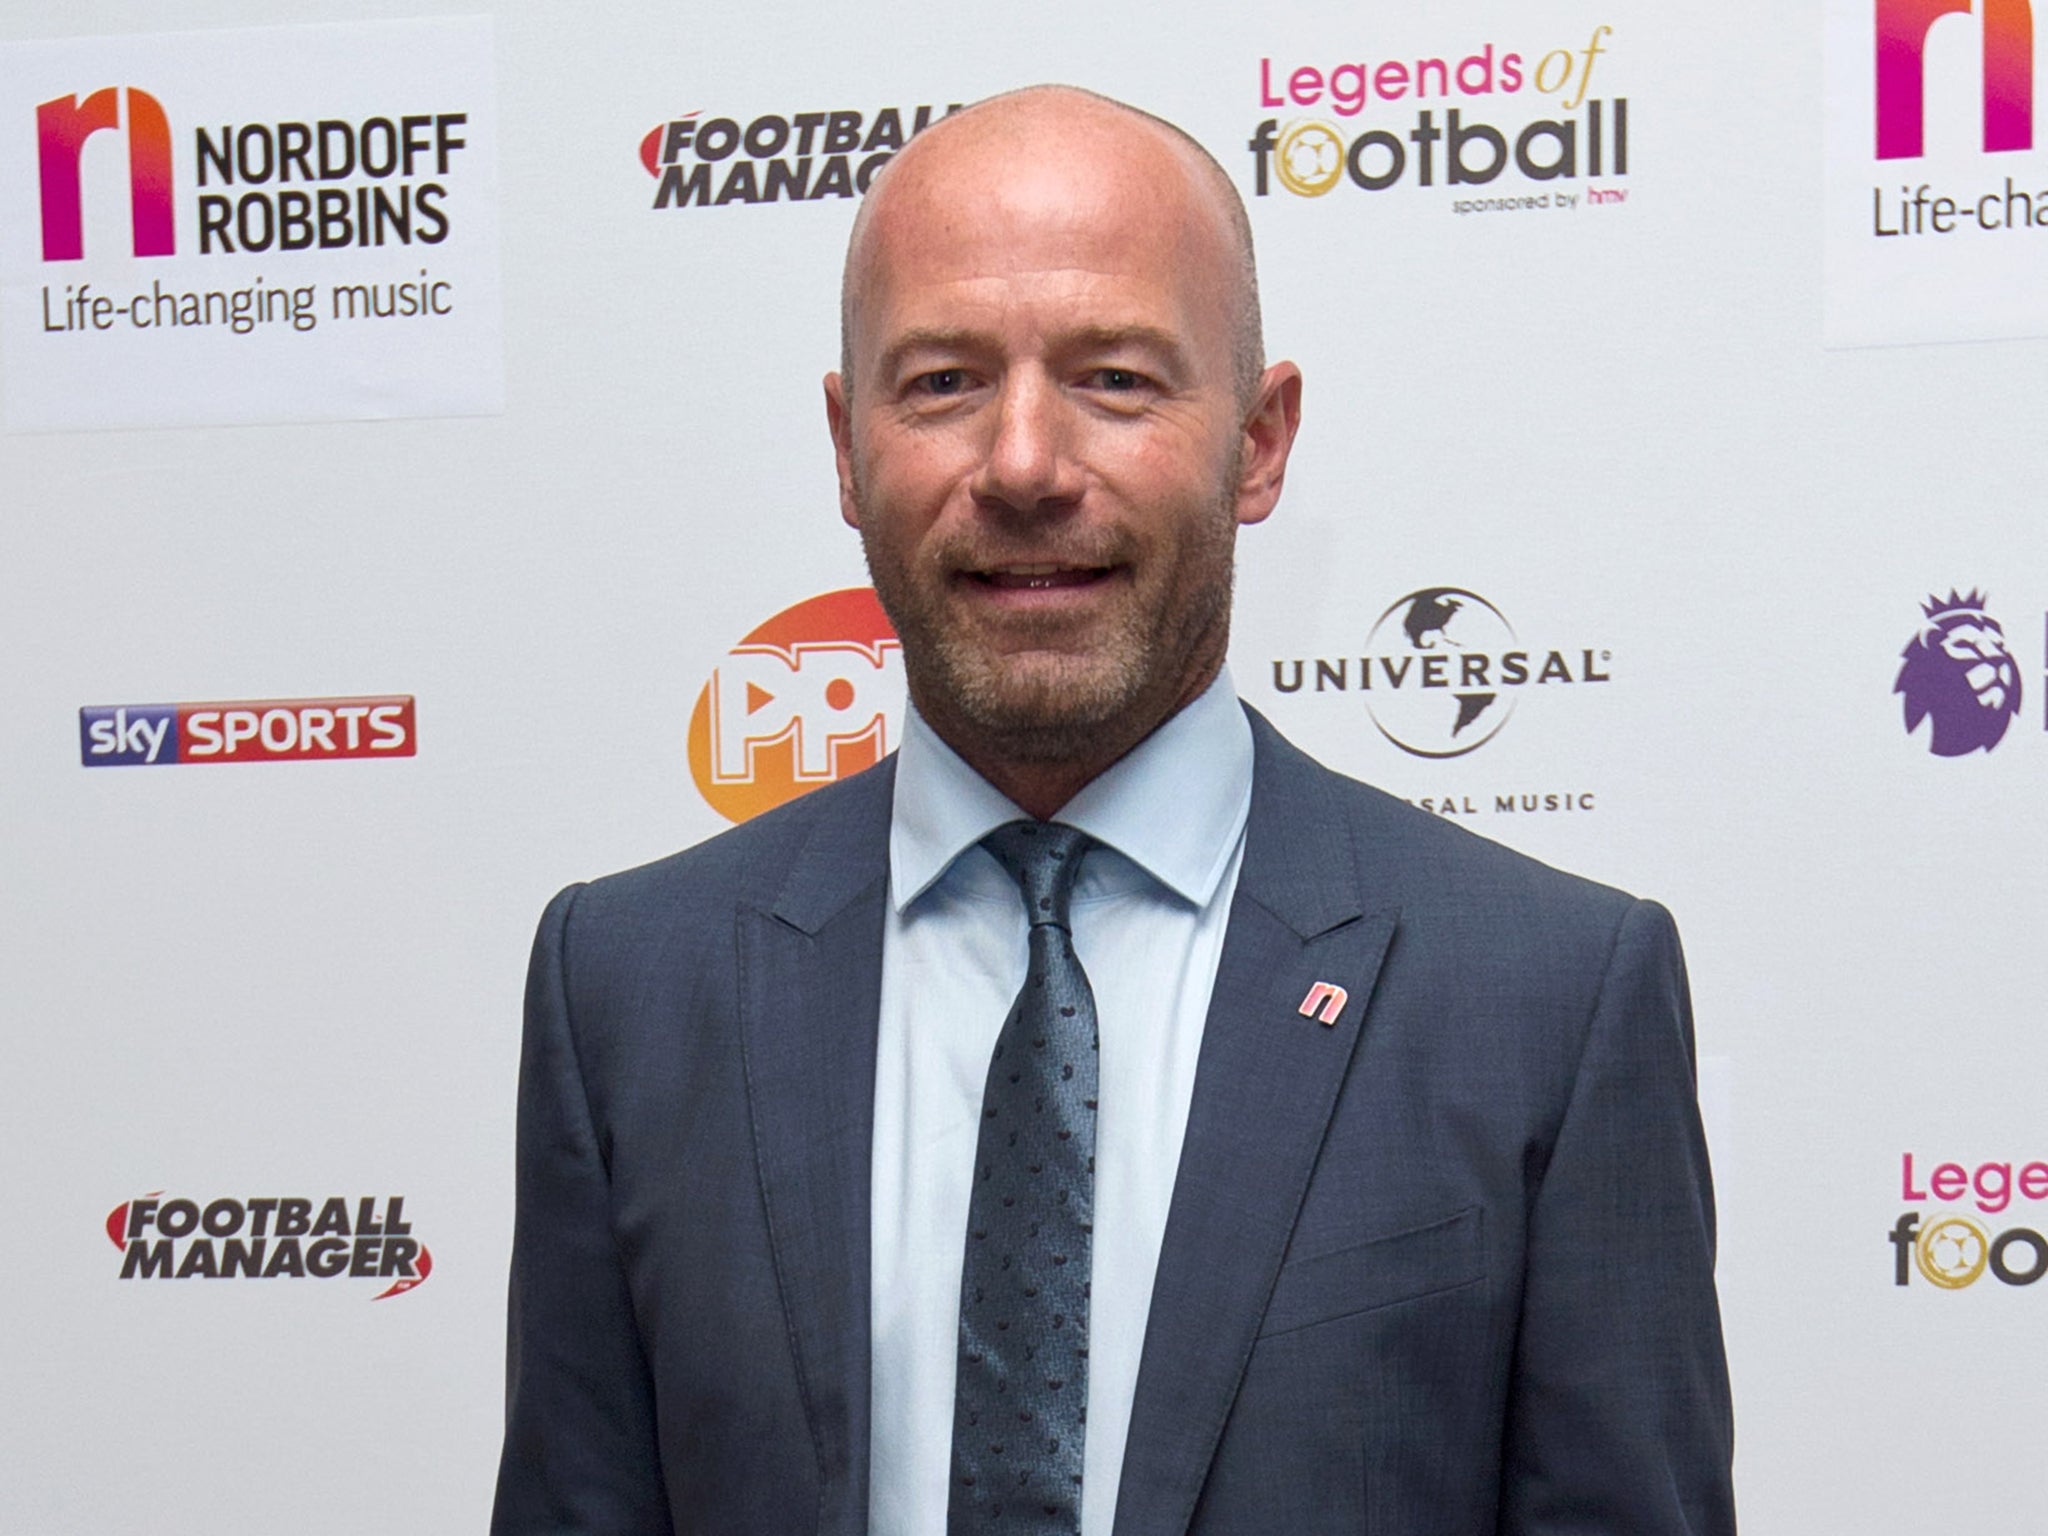 Shearer wants more research to be carried out on the effects of heading footballs